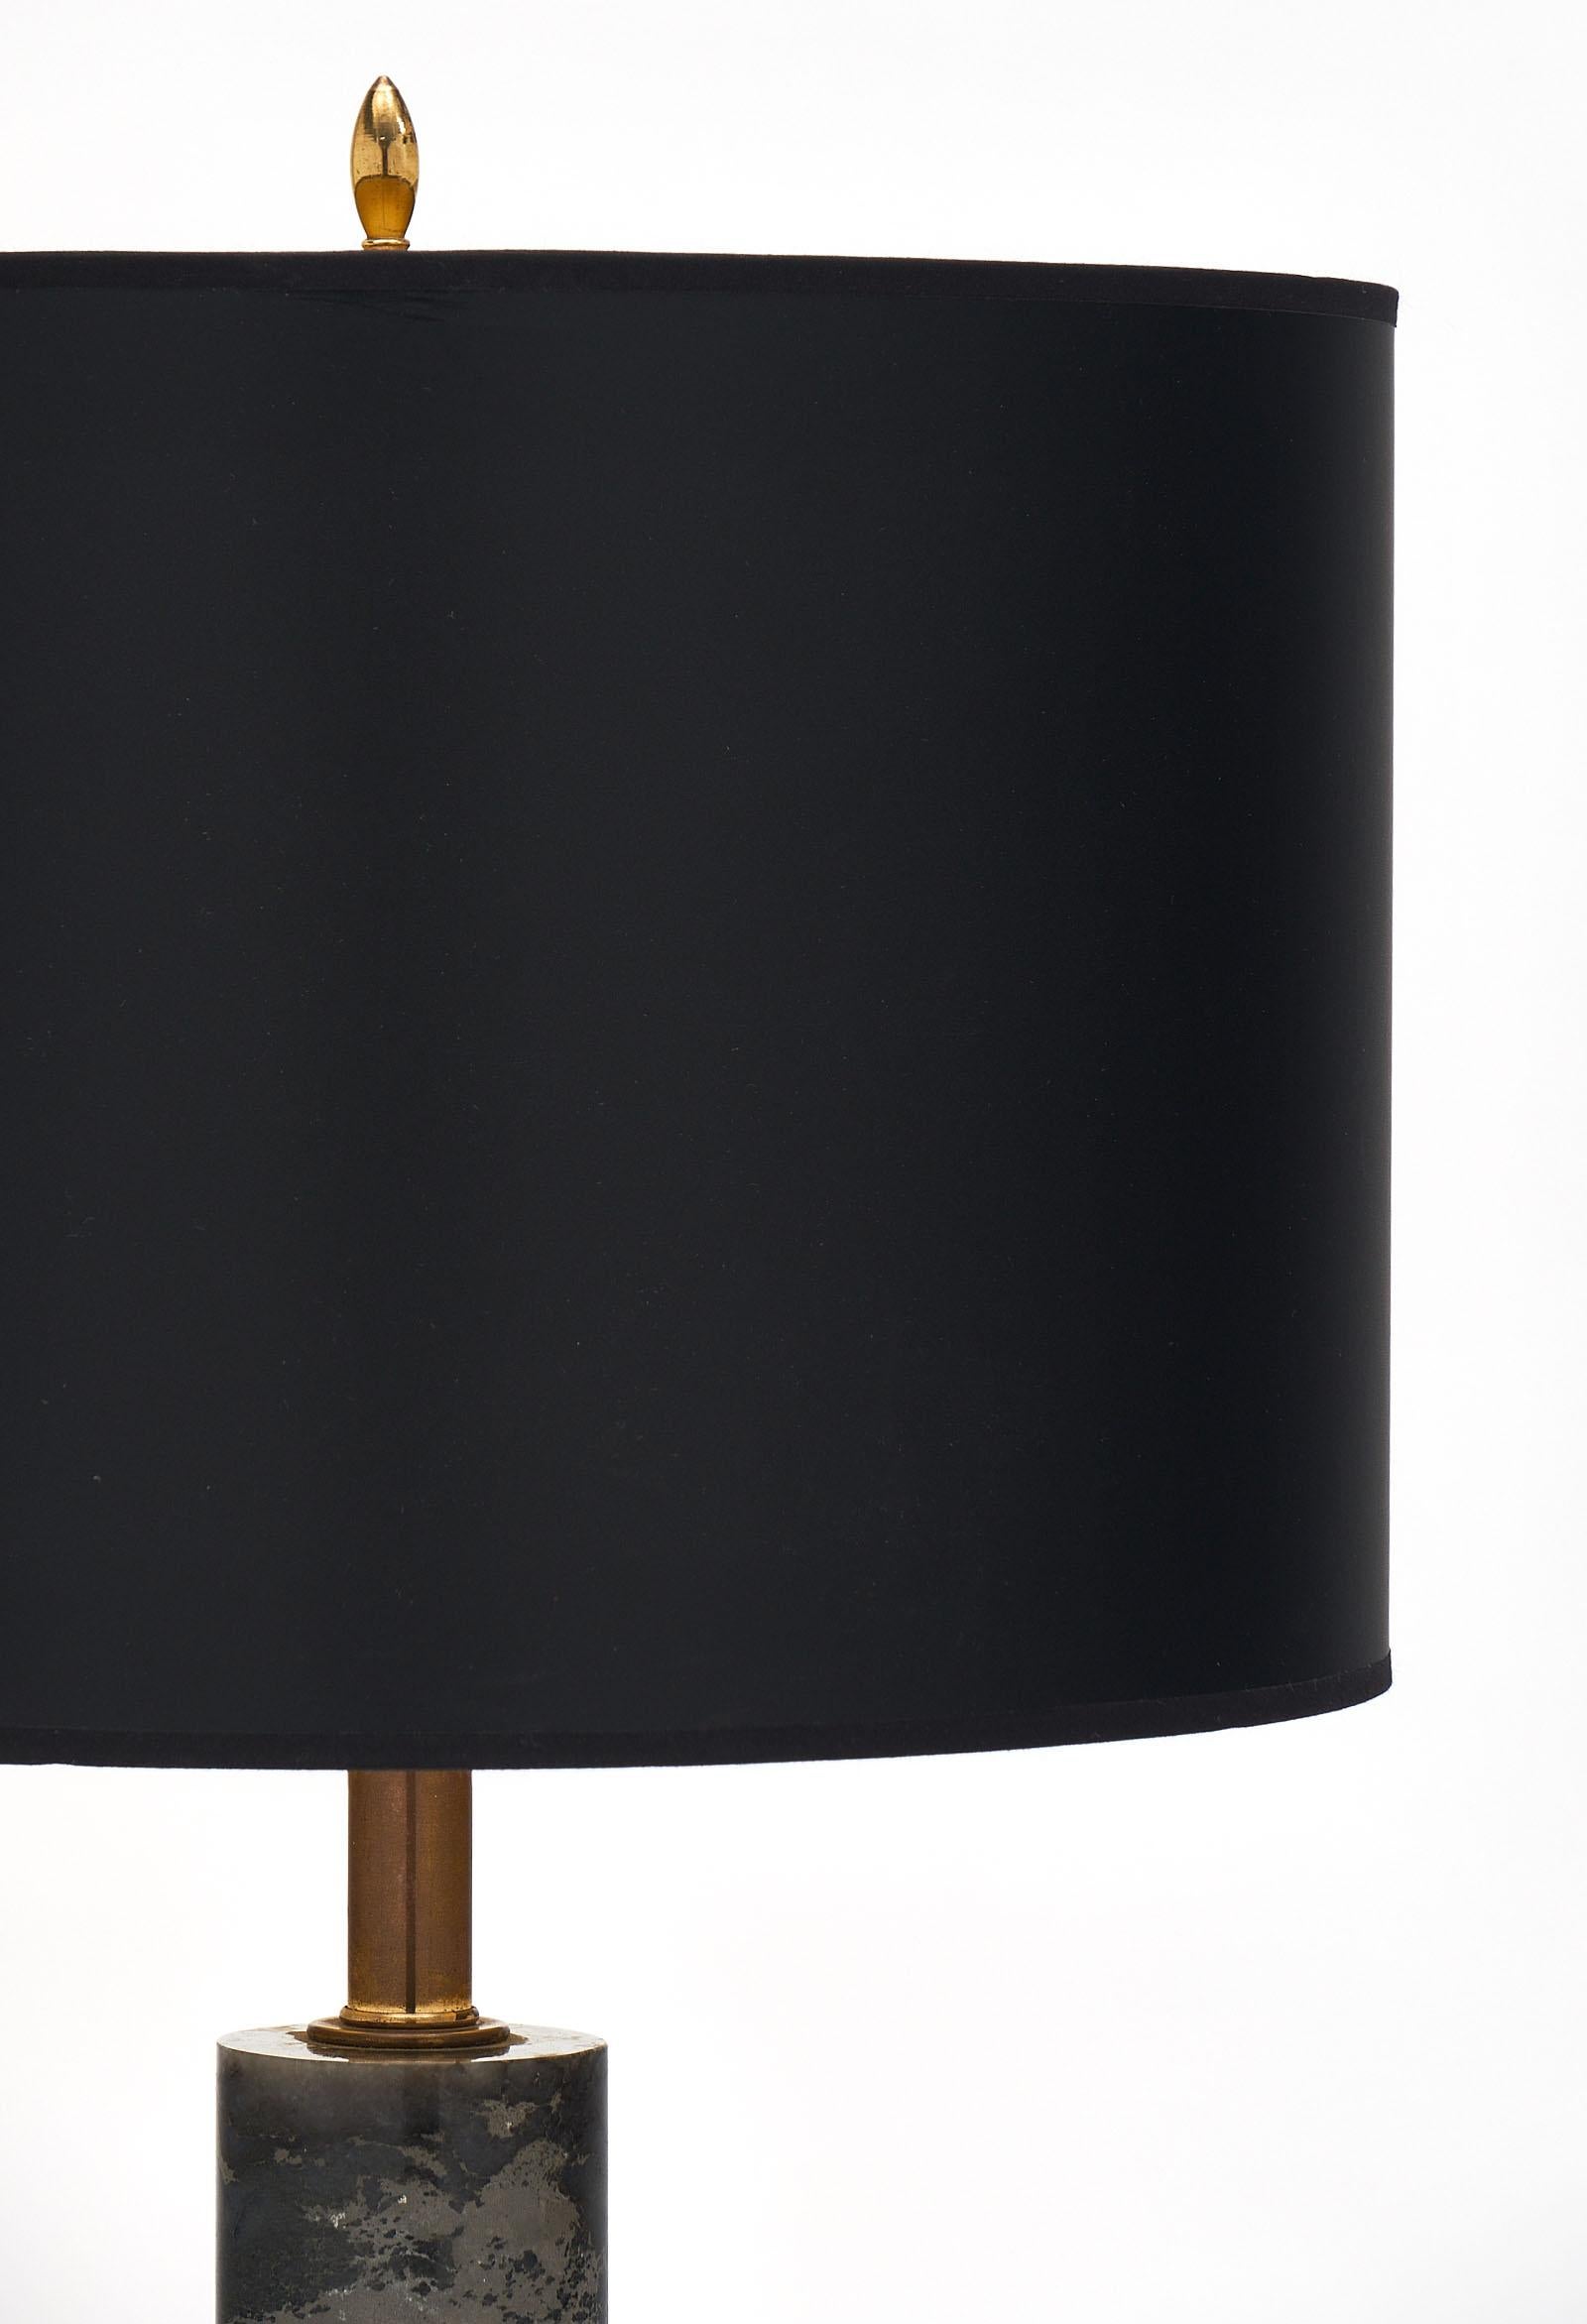 French modernist marble table lamps with a Turquin marble cylinder supported by an ebonized wooden base. The brass hardware adds to the elegance of this piece. It has been newly wired to fit US standards.